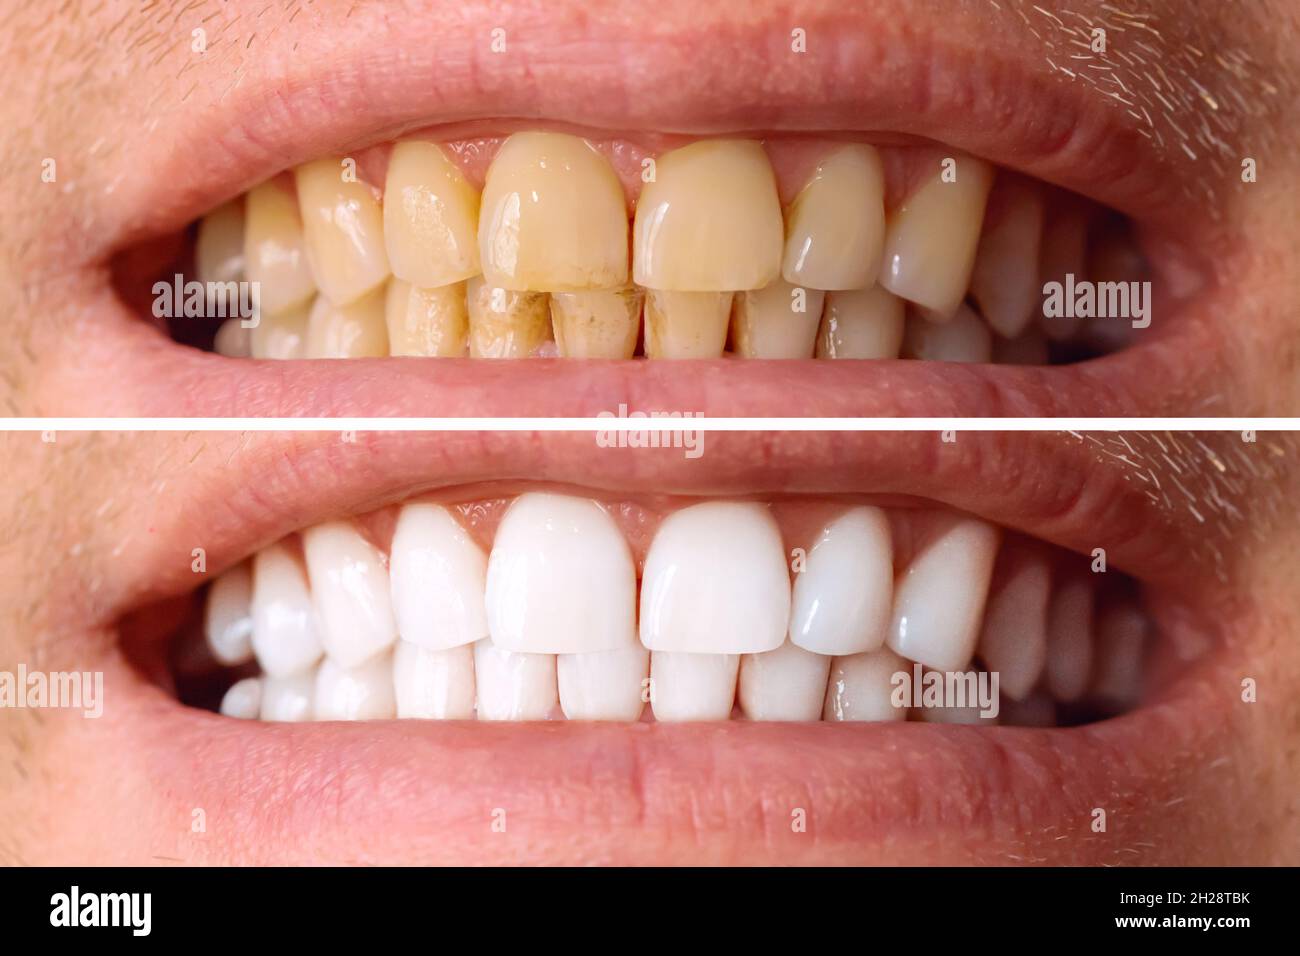 Teeth before and after whitening. Over white background. Dental clinic patient. Image symbolizes oral care dentistry, stomatology. Stock Photo